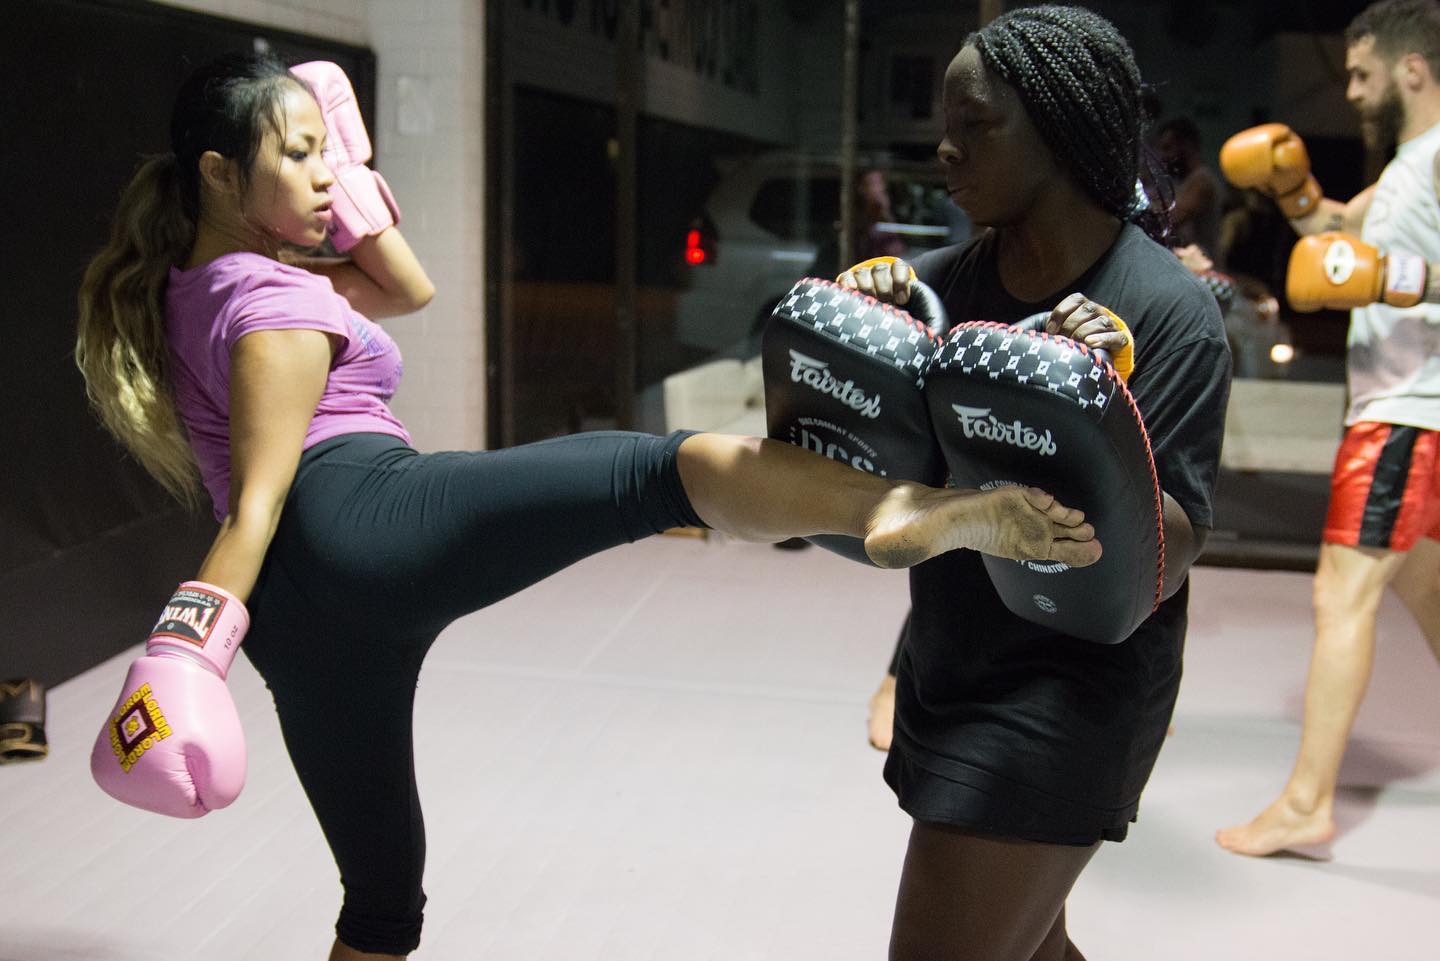 What to Expect Before Your First Kickboxing Class